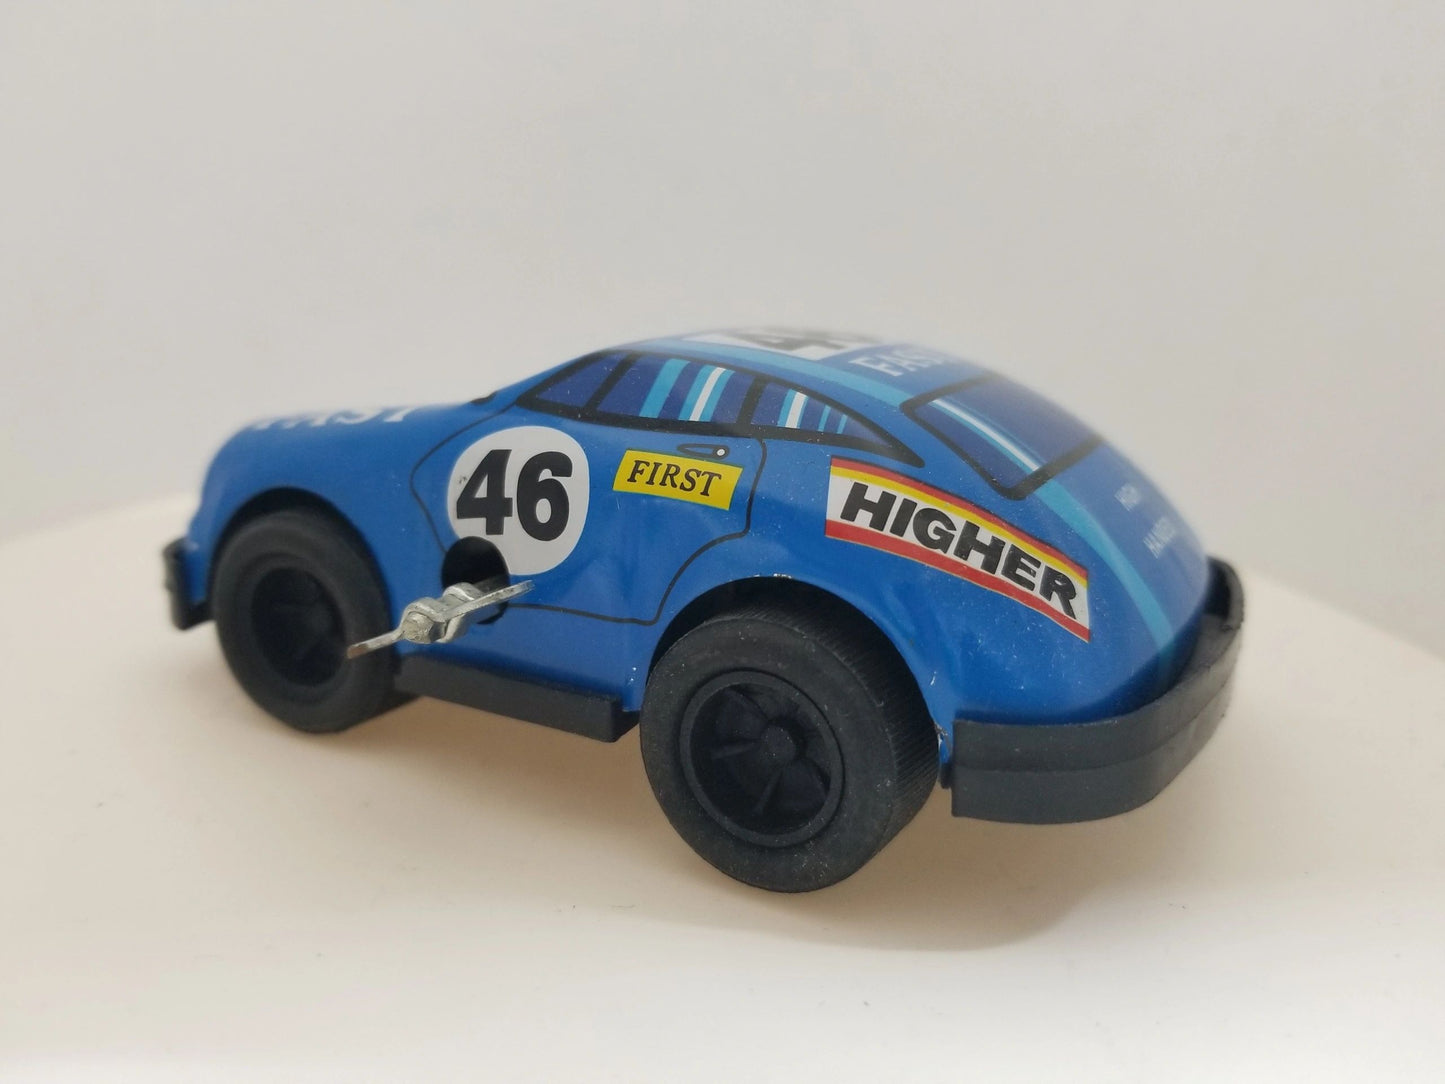 Tin Wind-up Racecar Collector's Toy